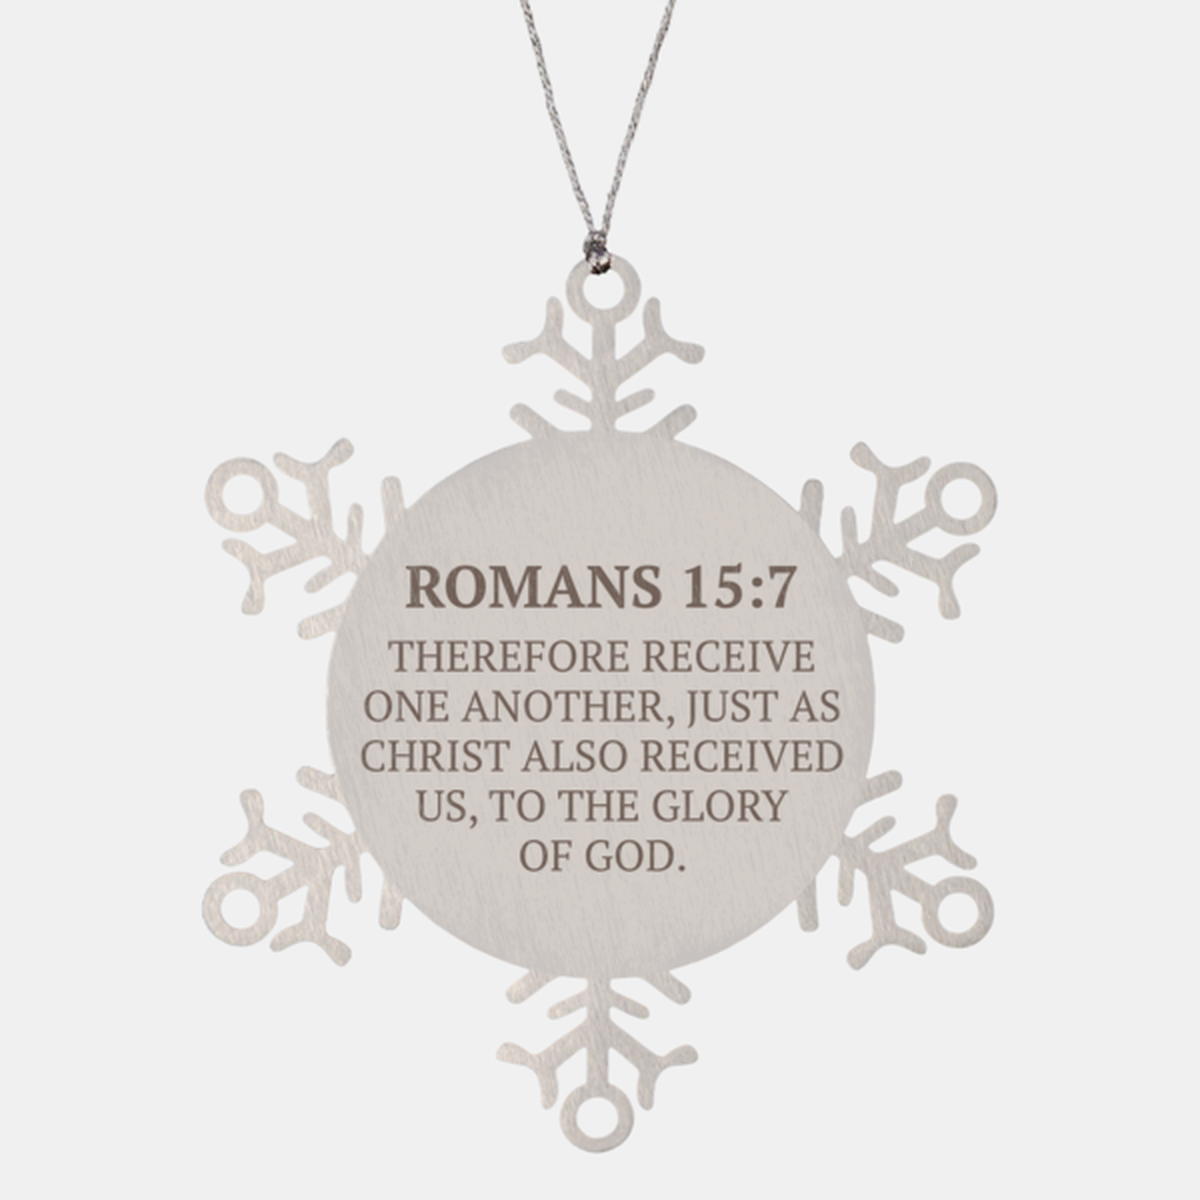 Christian Ornaments For Christmas Tree, Therefore Receive One Another, Religious Christmas Decorations, Scripture Ornaments Gifts, Bible Verse Ornament